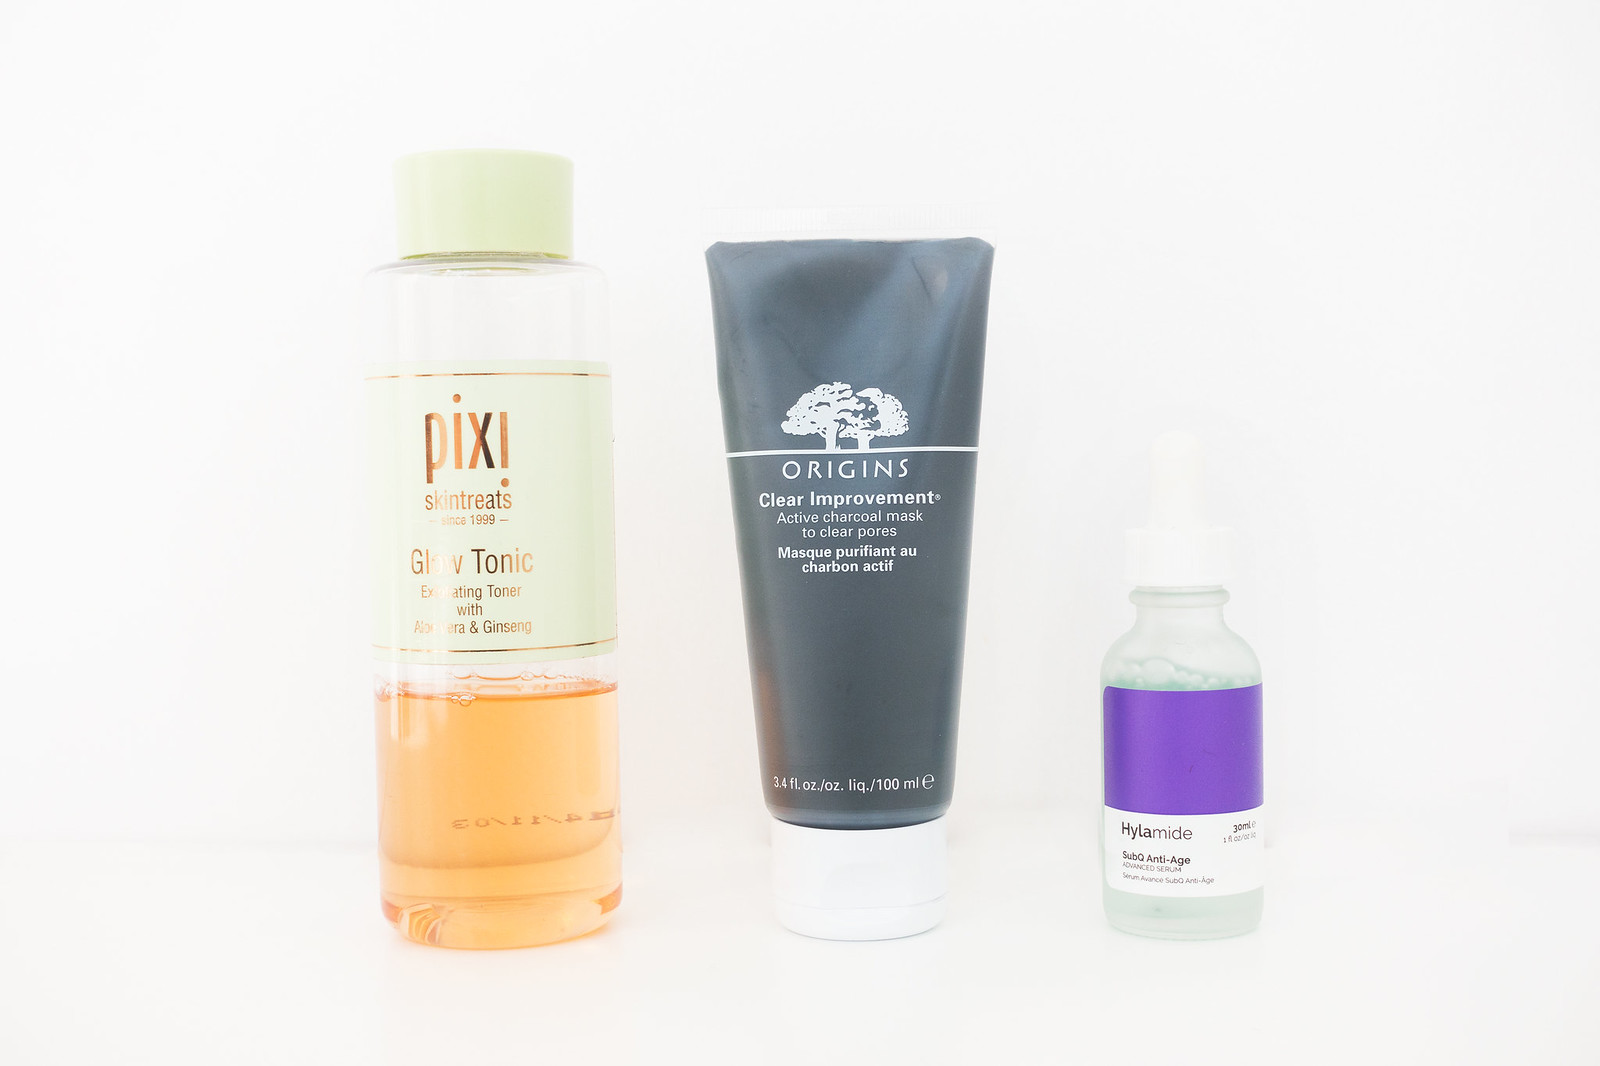 Products On Trial #4 | Final Reviews: Pixi, Origins, & Hylamide